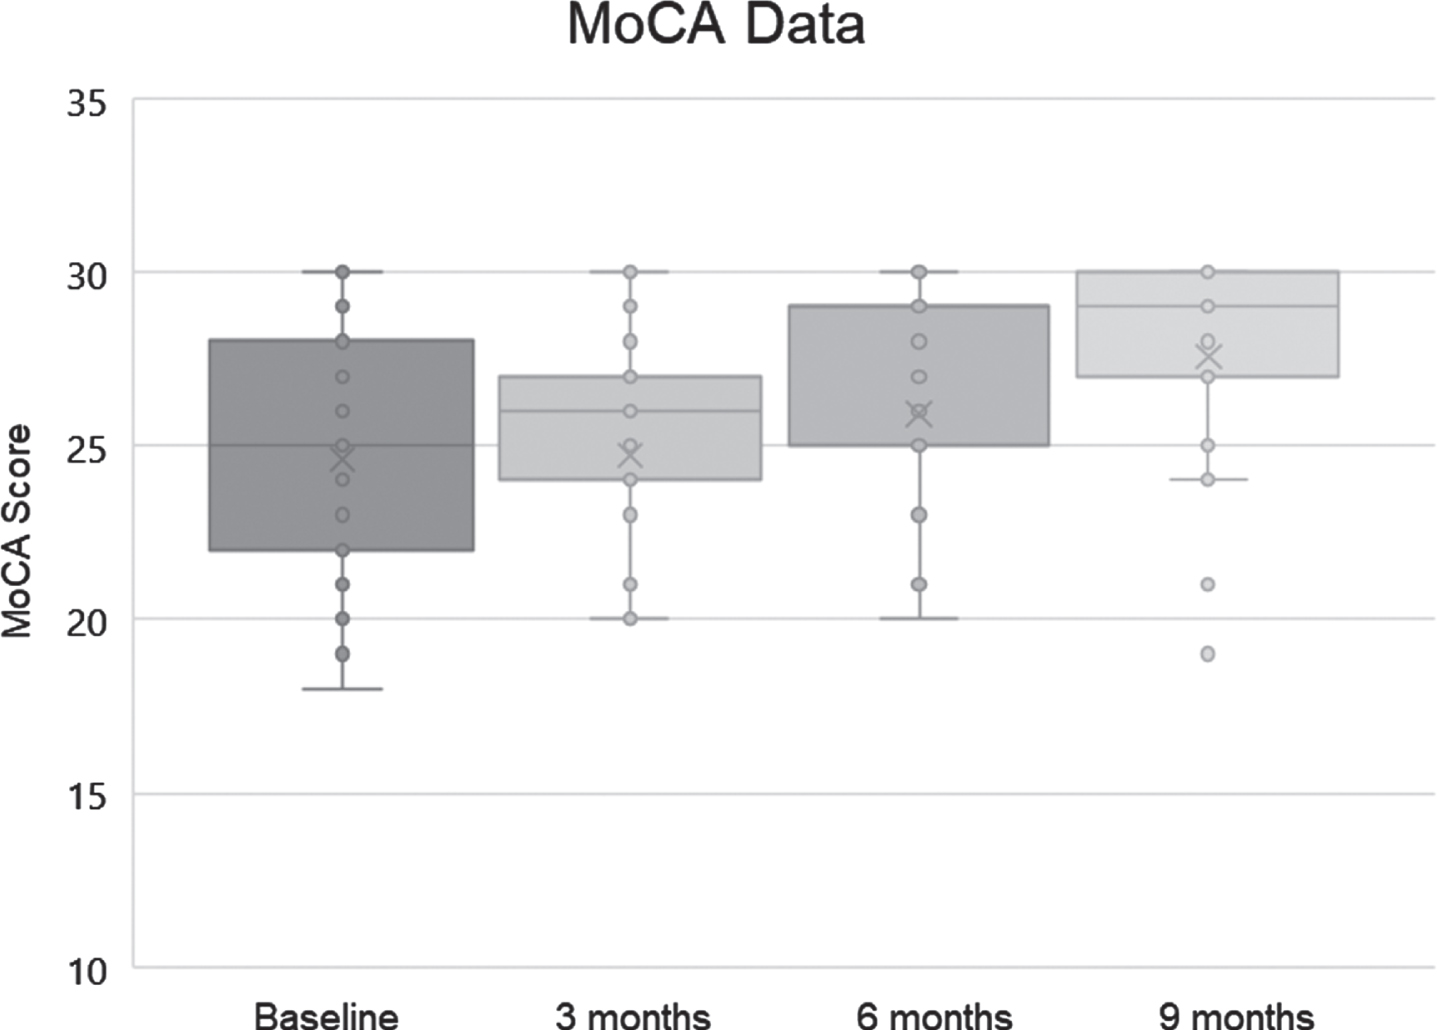 MoCA scores (dots), means (x), medians (bars; note that the median at 6 months was 29), and lowest and highest quartiles (whiskers) for the 25 subjects.